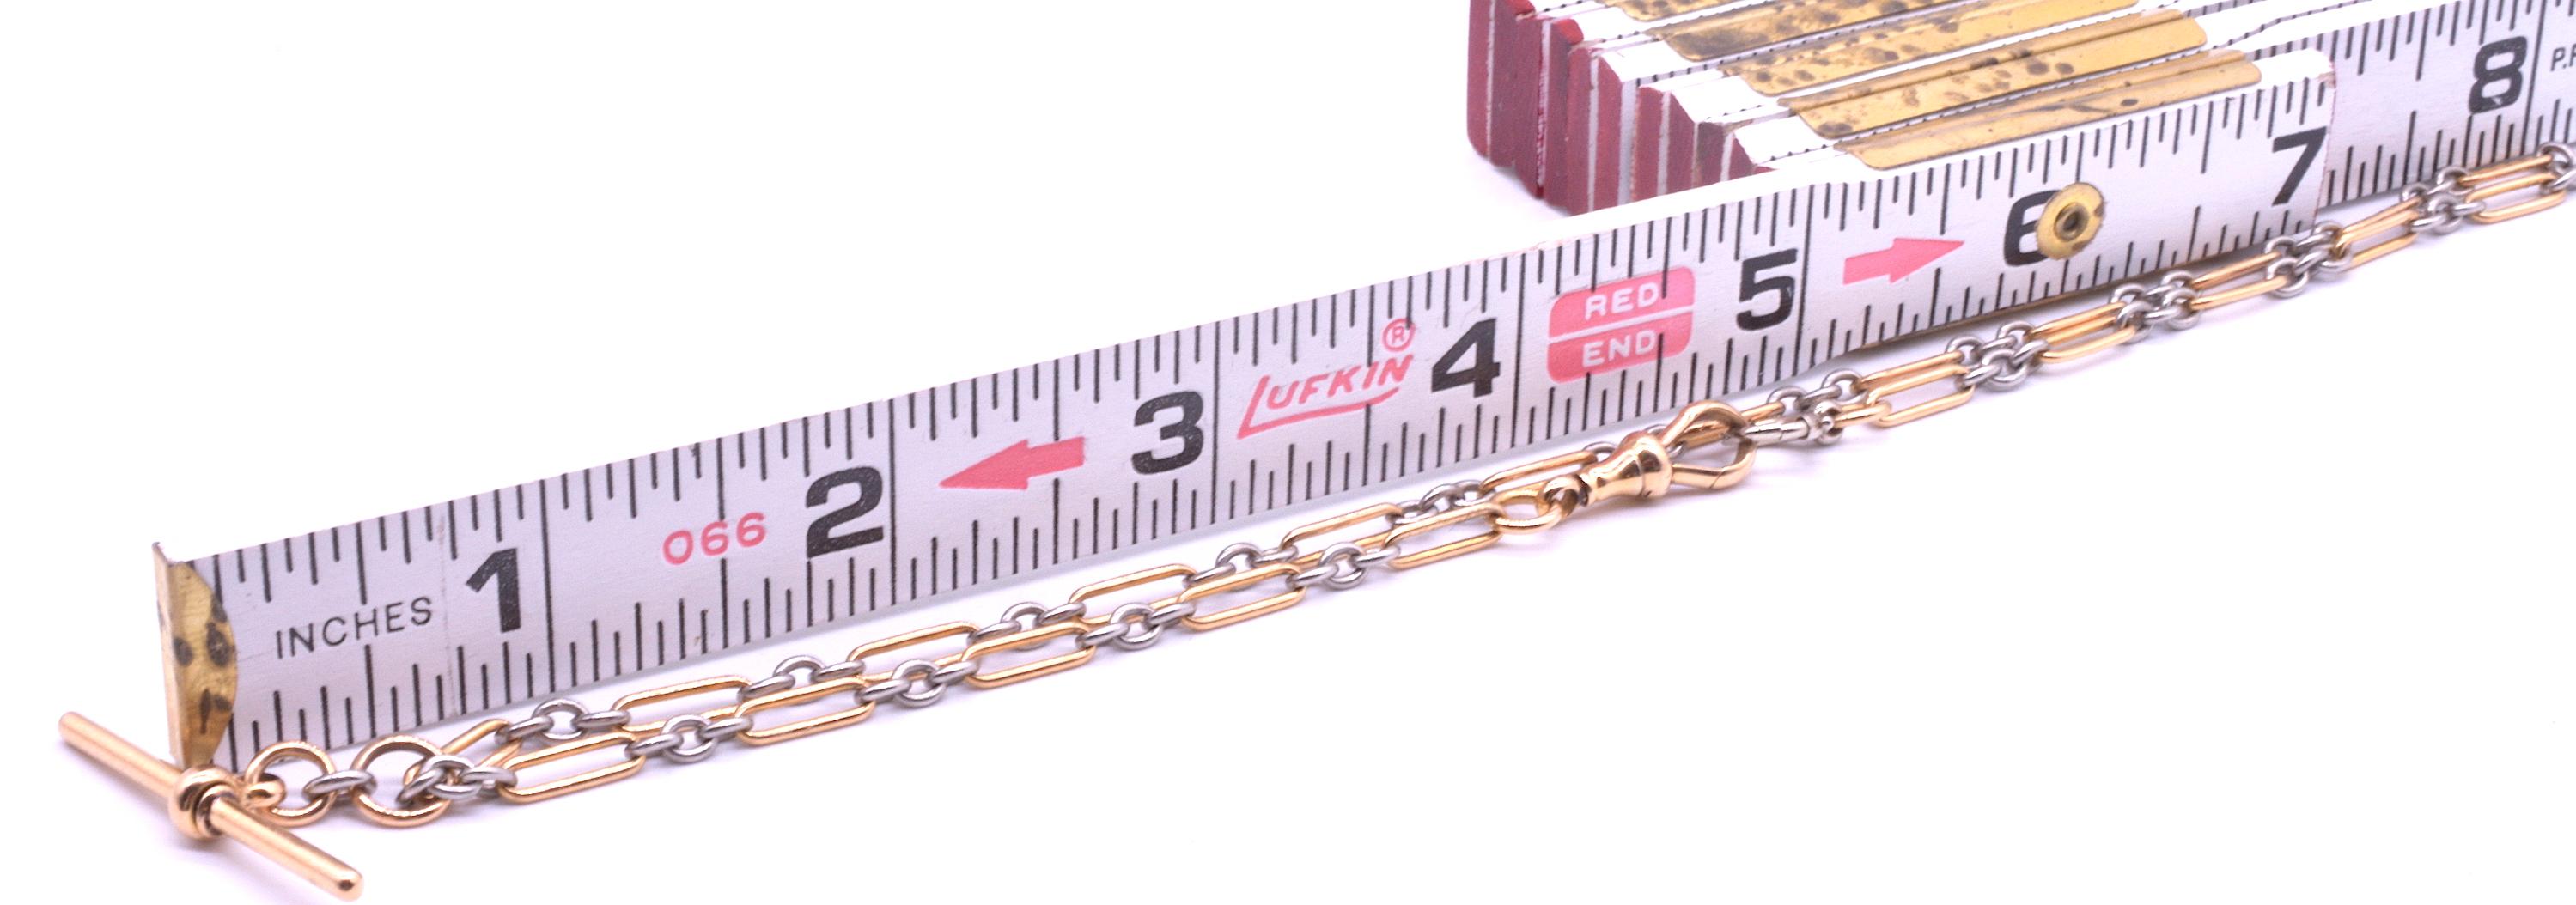 .13 inches on a ruler